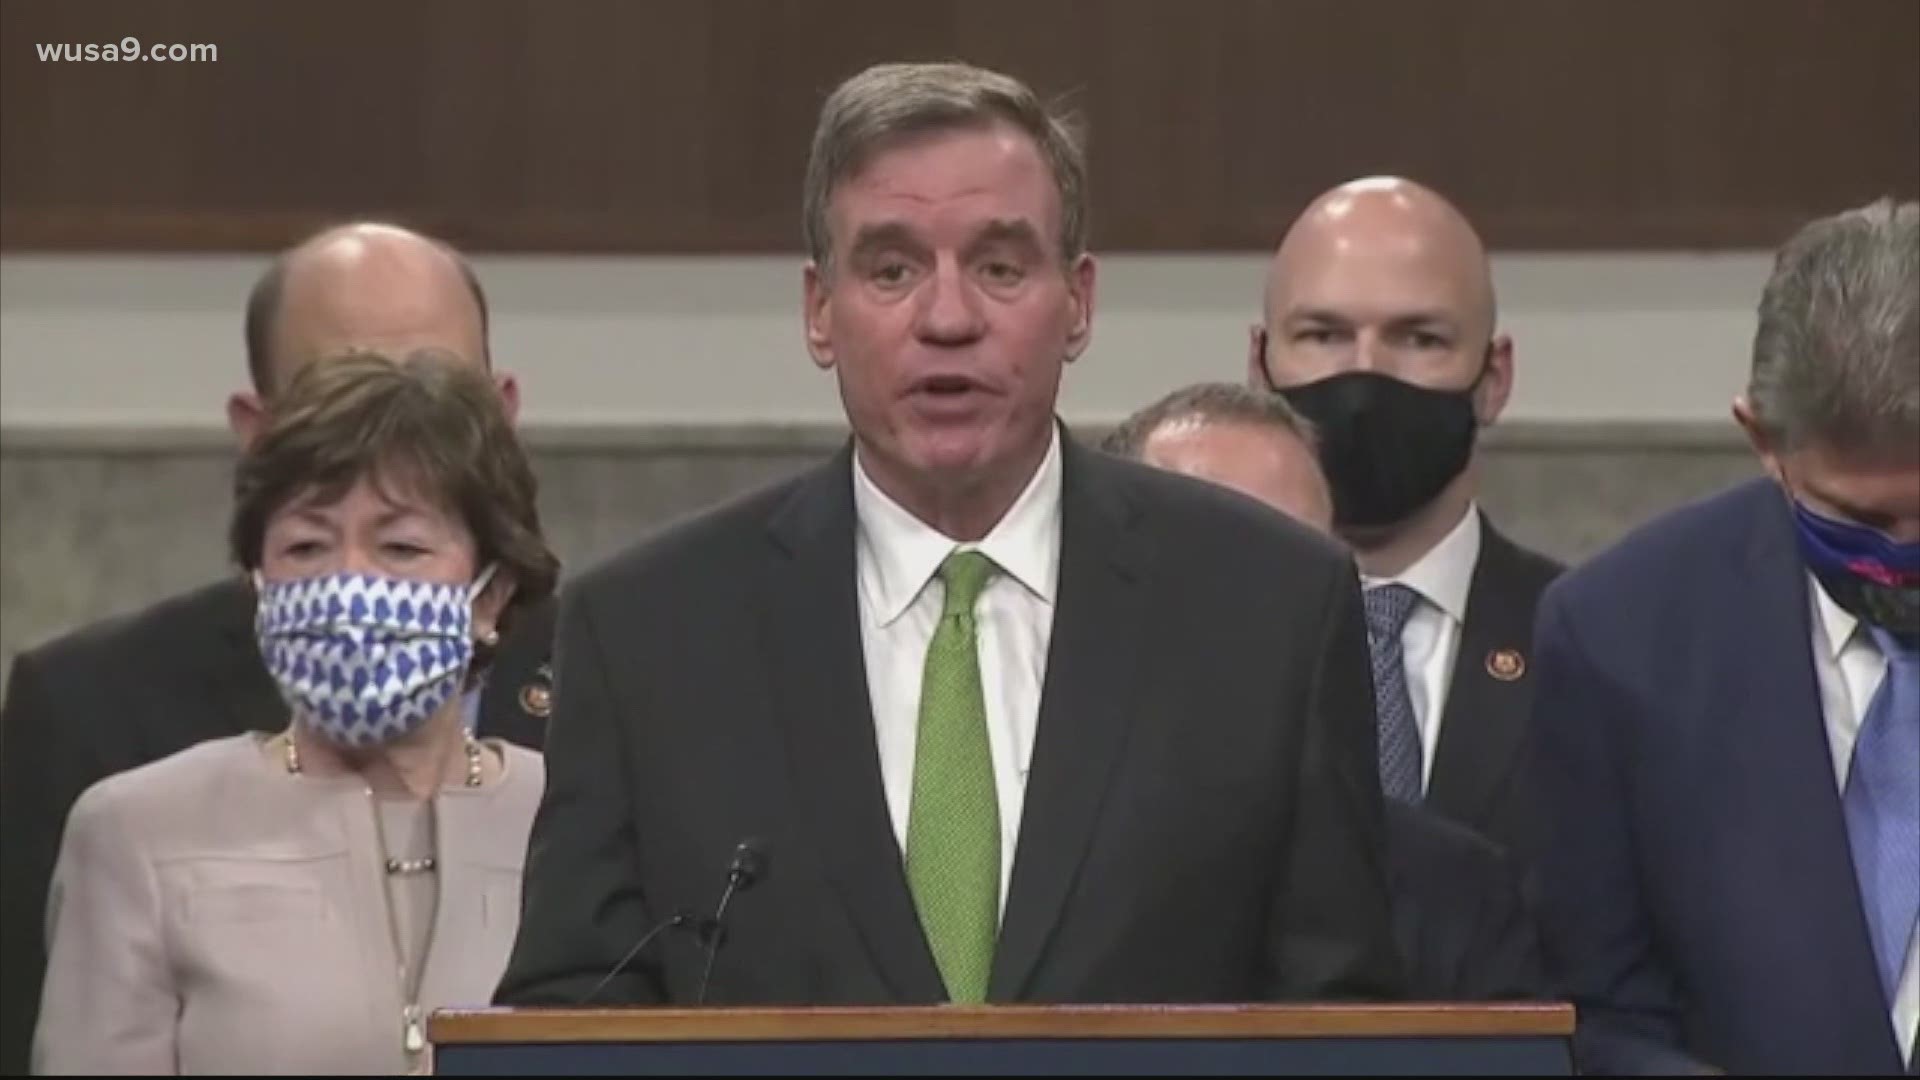 Senator Mark Warner along with 7 other Senators presented the framework for a new covid relief funding bill